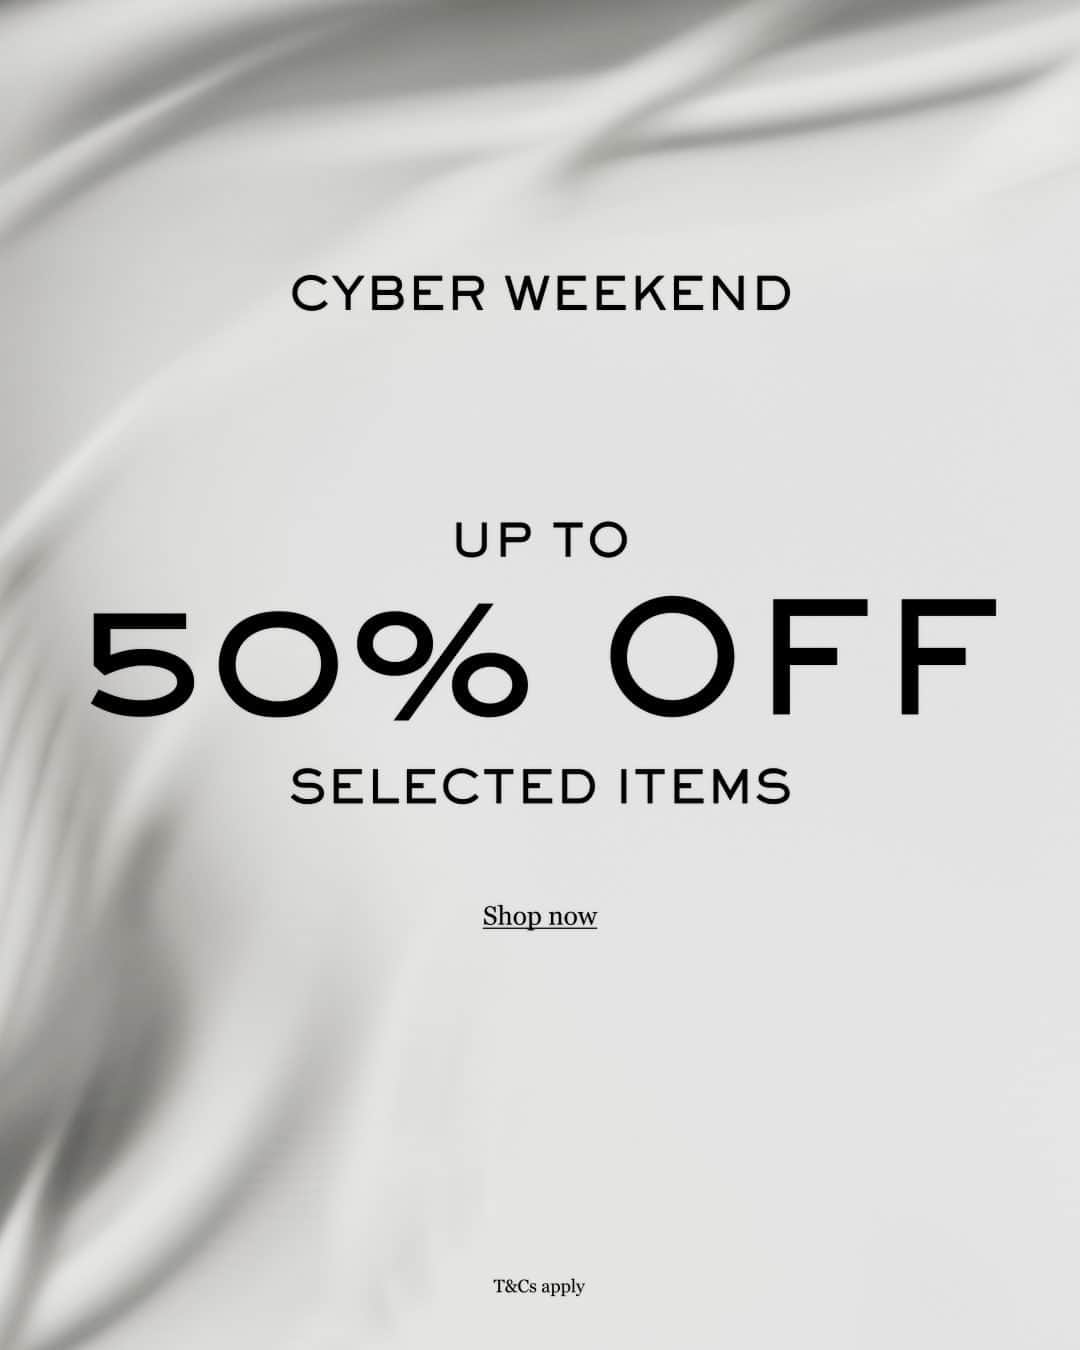 MR PORTERのインスタグラム：「Celebrate Cyber Weekend in style with up to 50% off at MR PORTER. Whether you’re looking for deals on designer sneakers, discounts on footwear or an offer on coats and jackets, there’s something for everyone in our selection of luxury items for less.   The exclusive 50% off discount will automatically apply at checkout.  Link in bio to discover our Cyber Weekend edit.」